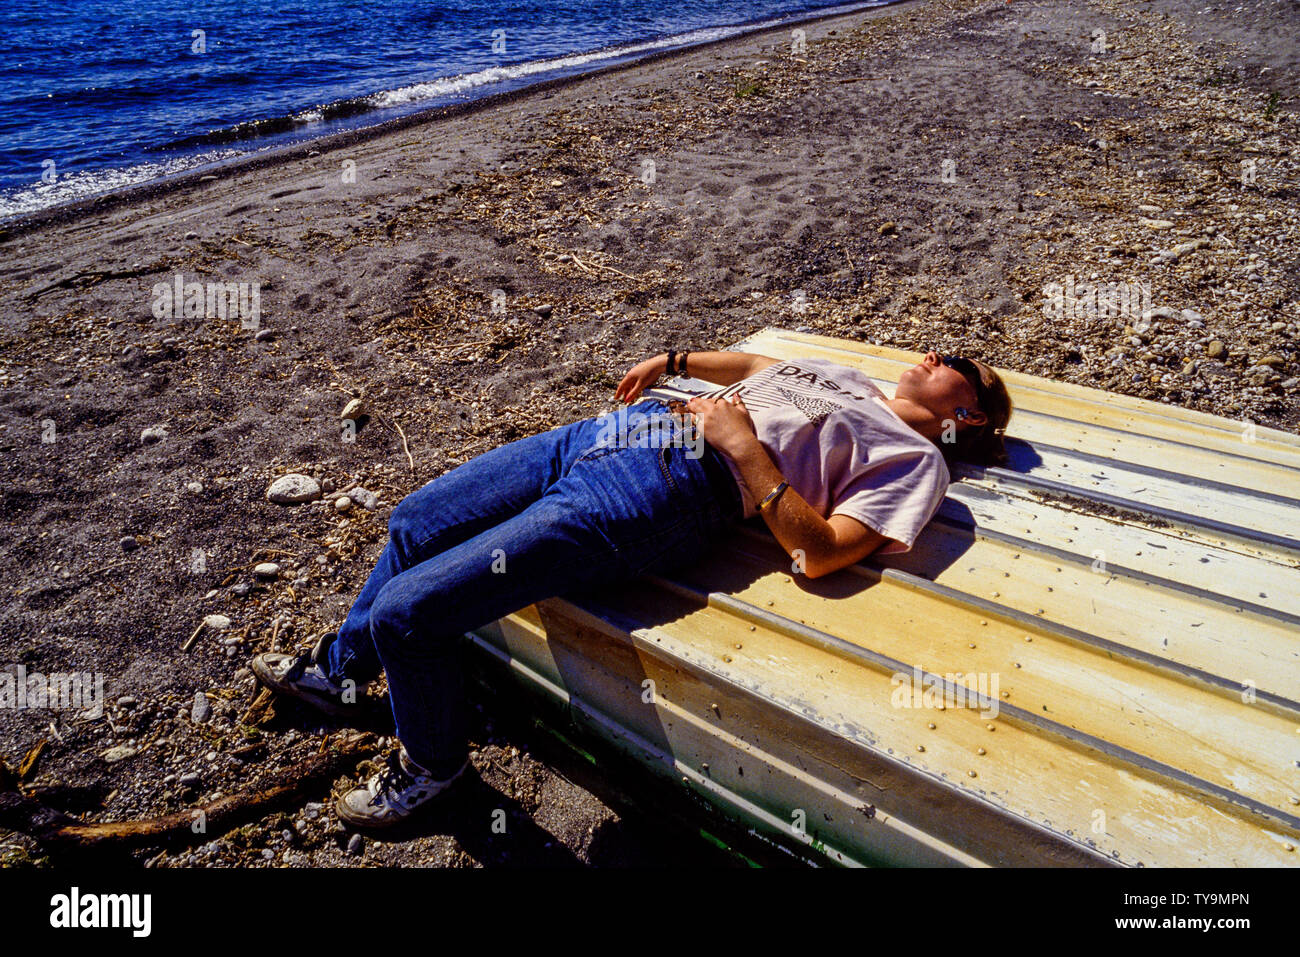 New Zealand, North Island. Tourist resting in the sun on an upturned boat on the shore of Lake Taupo. Photo: © Simon Grosset. Archive: Image digitised Stock Photo